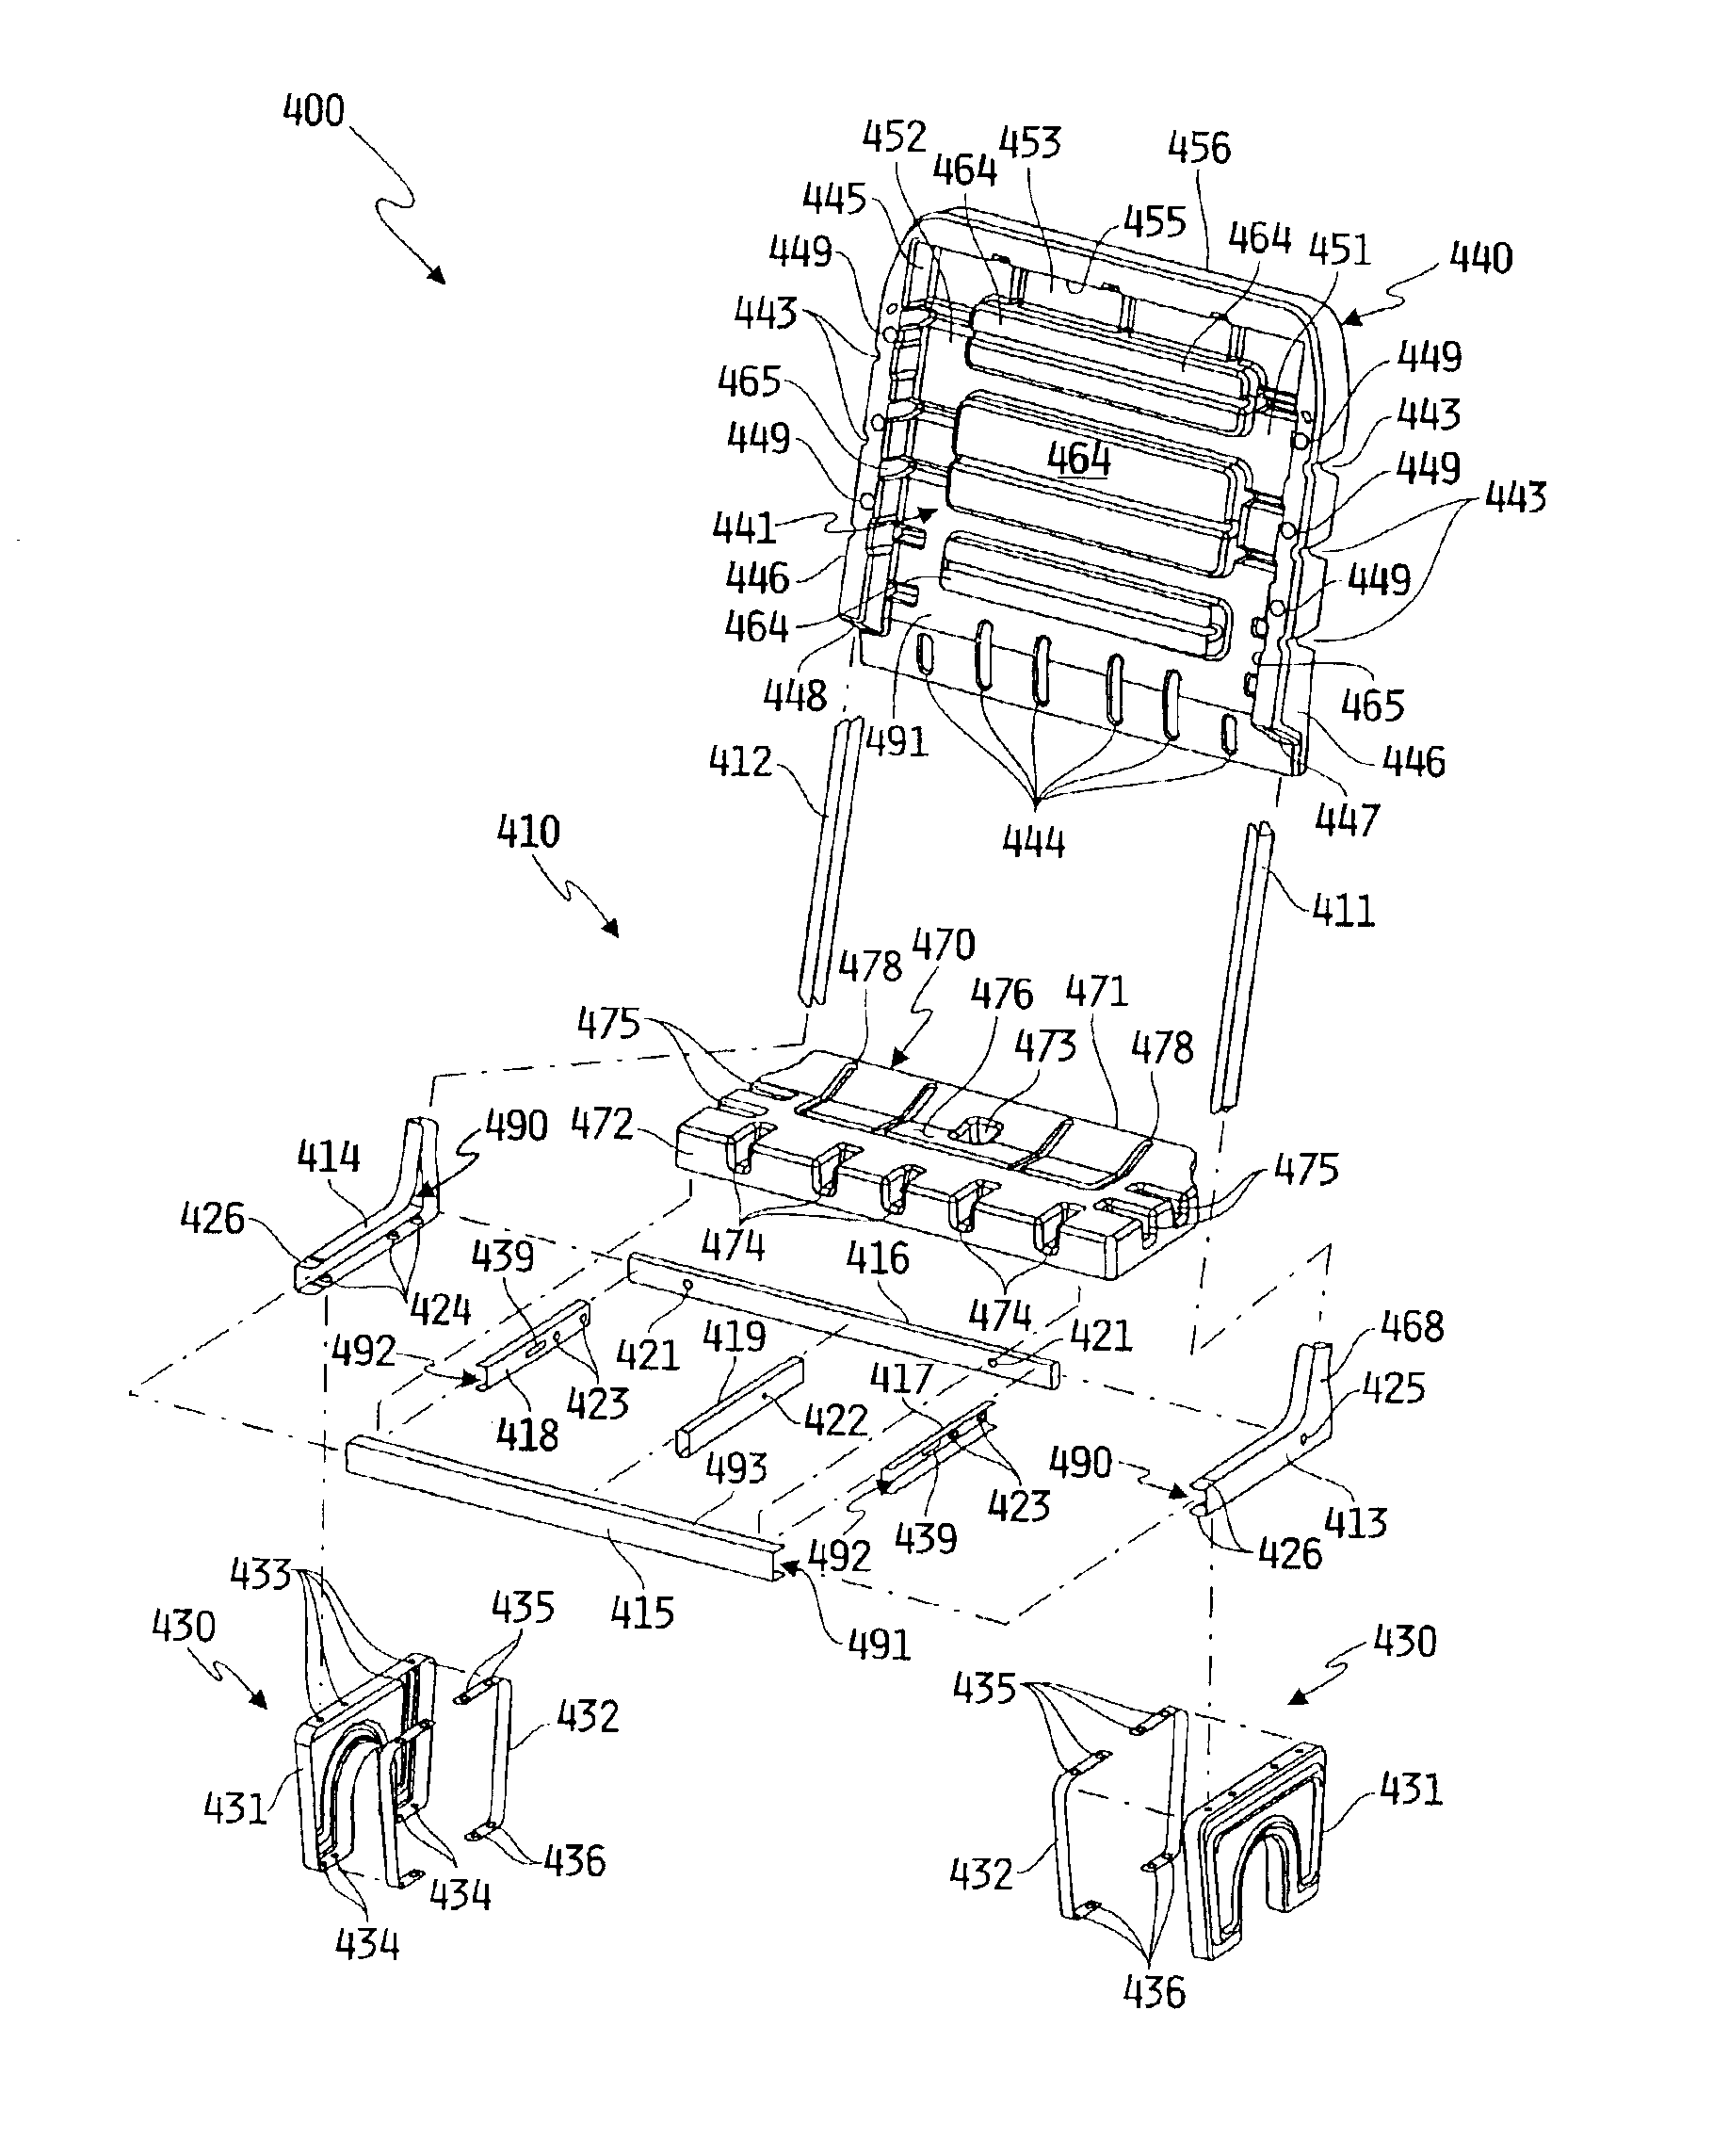 Restraint system for a vehicle